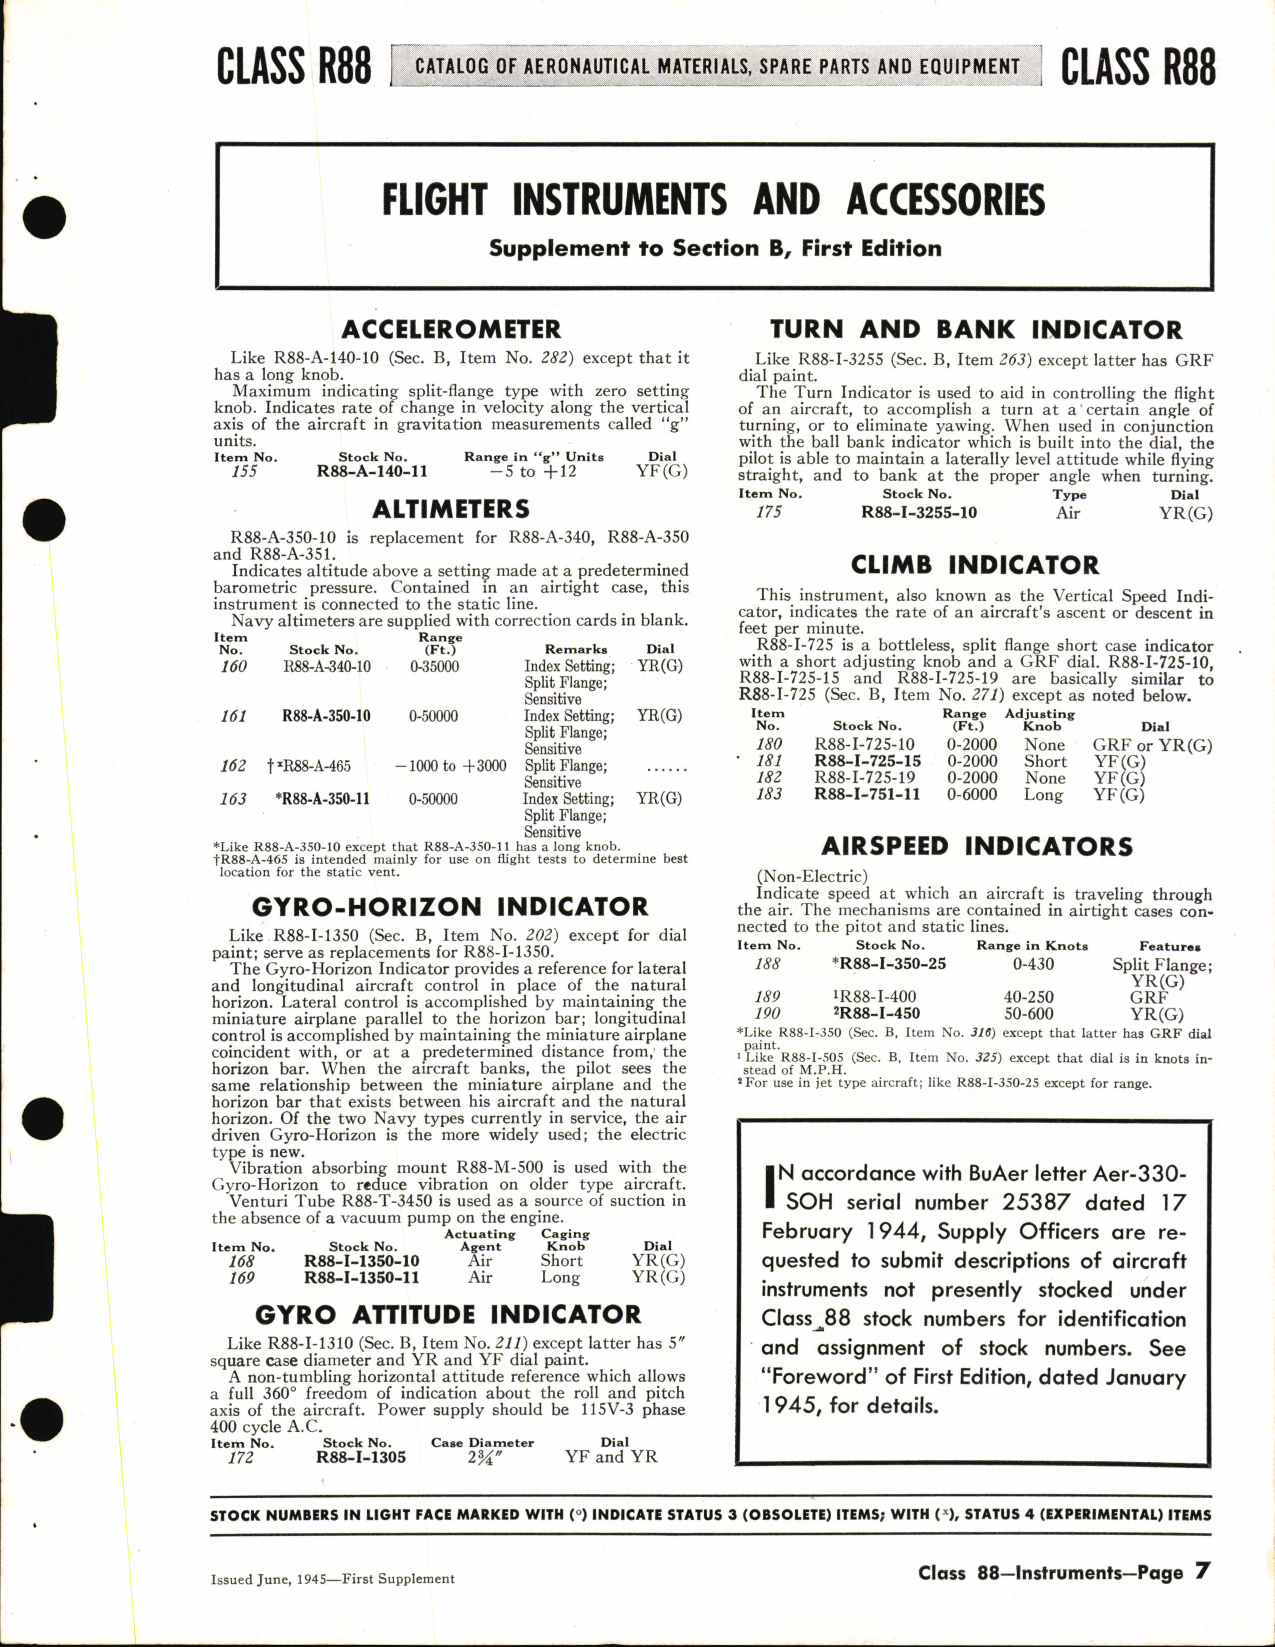 Sample page 7 from AirCorps Library document: Aeronautical Instruments 